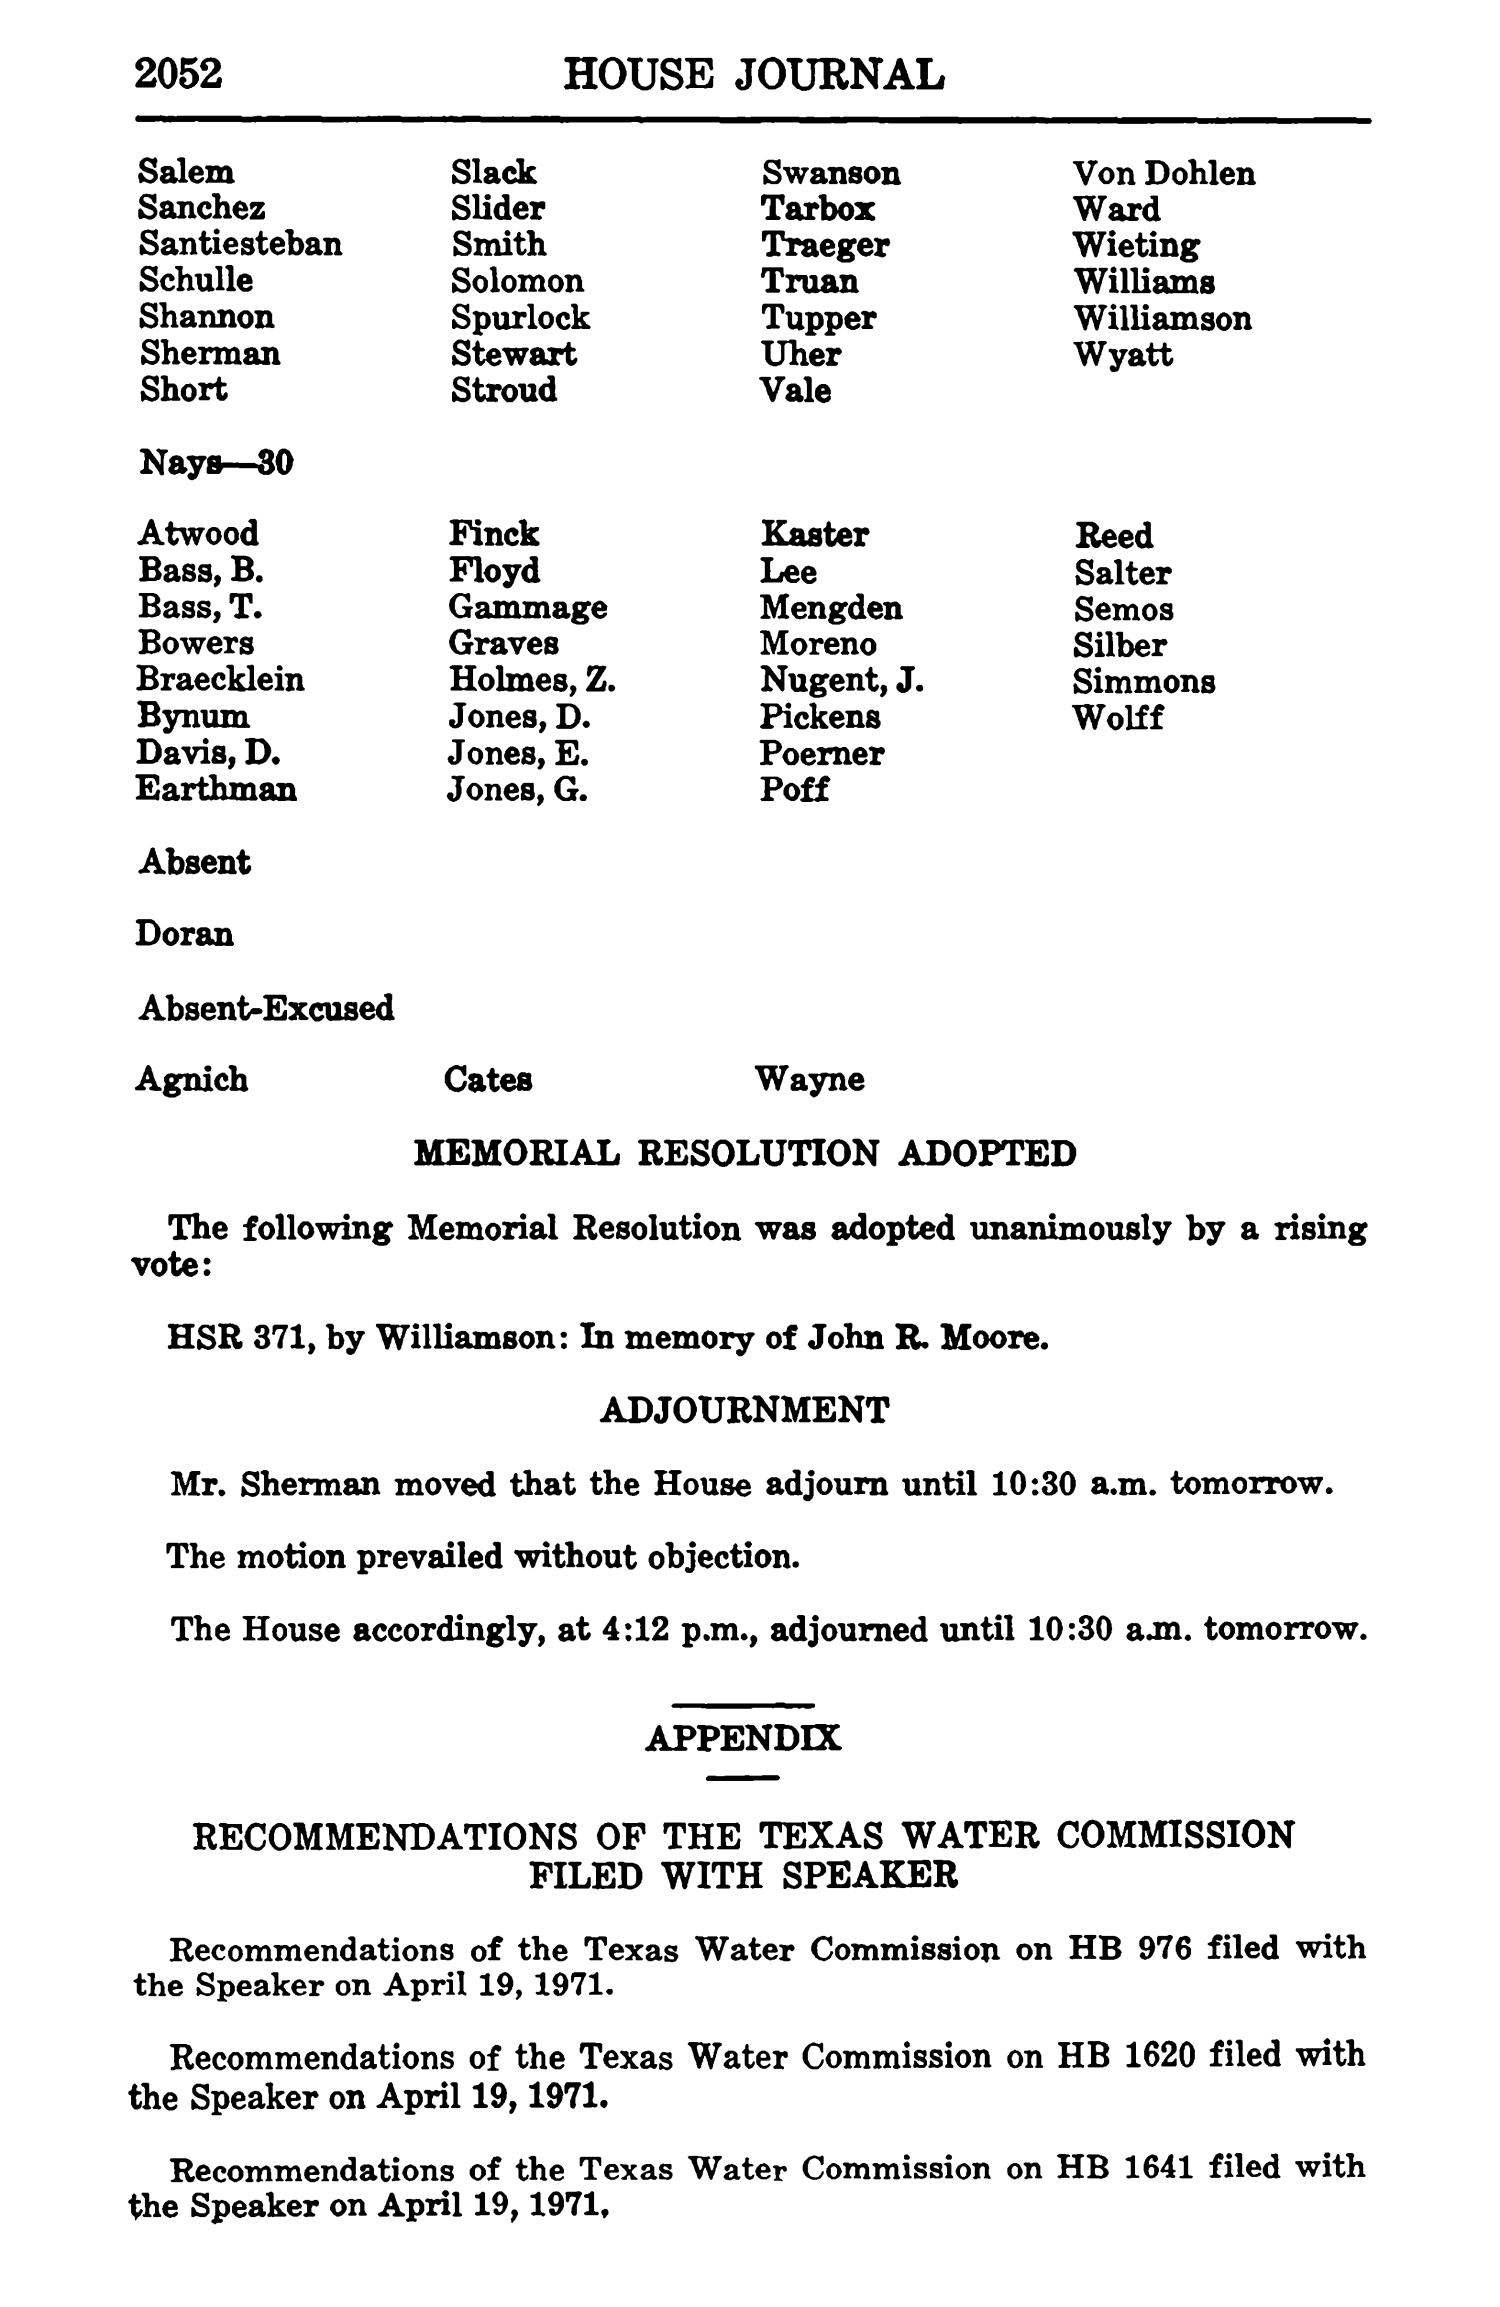 Journal of the House of Representatives of the Regular Session of the Sixty-Second Legislature of the State of Texas, Volume 2
                                                
                                                    2052
                                                